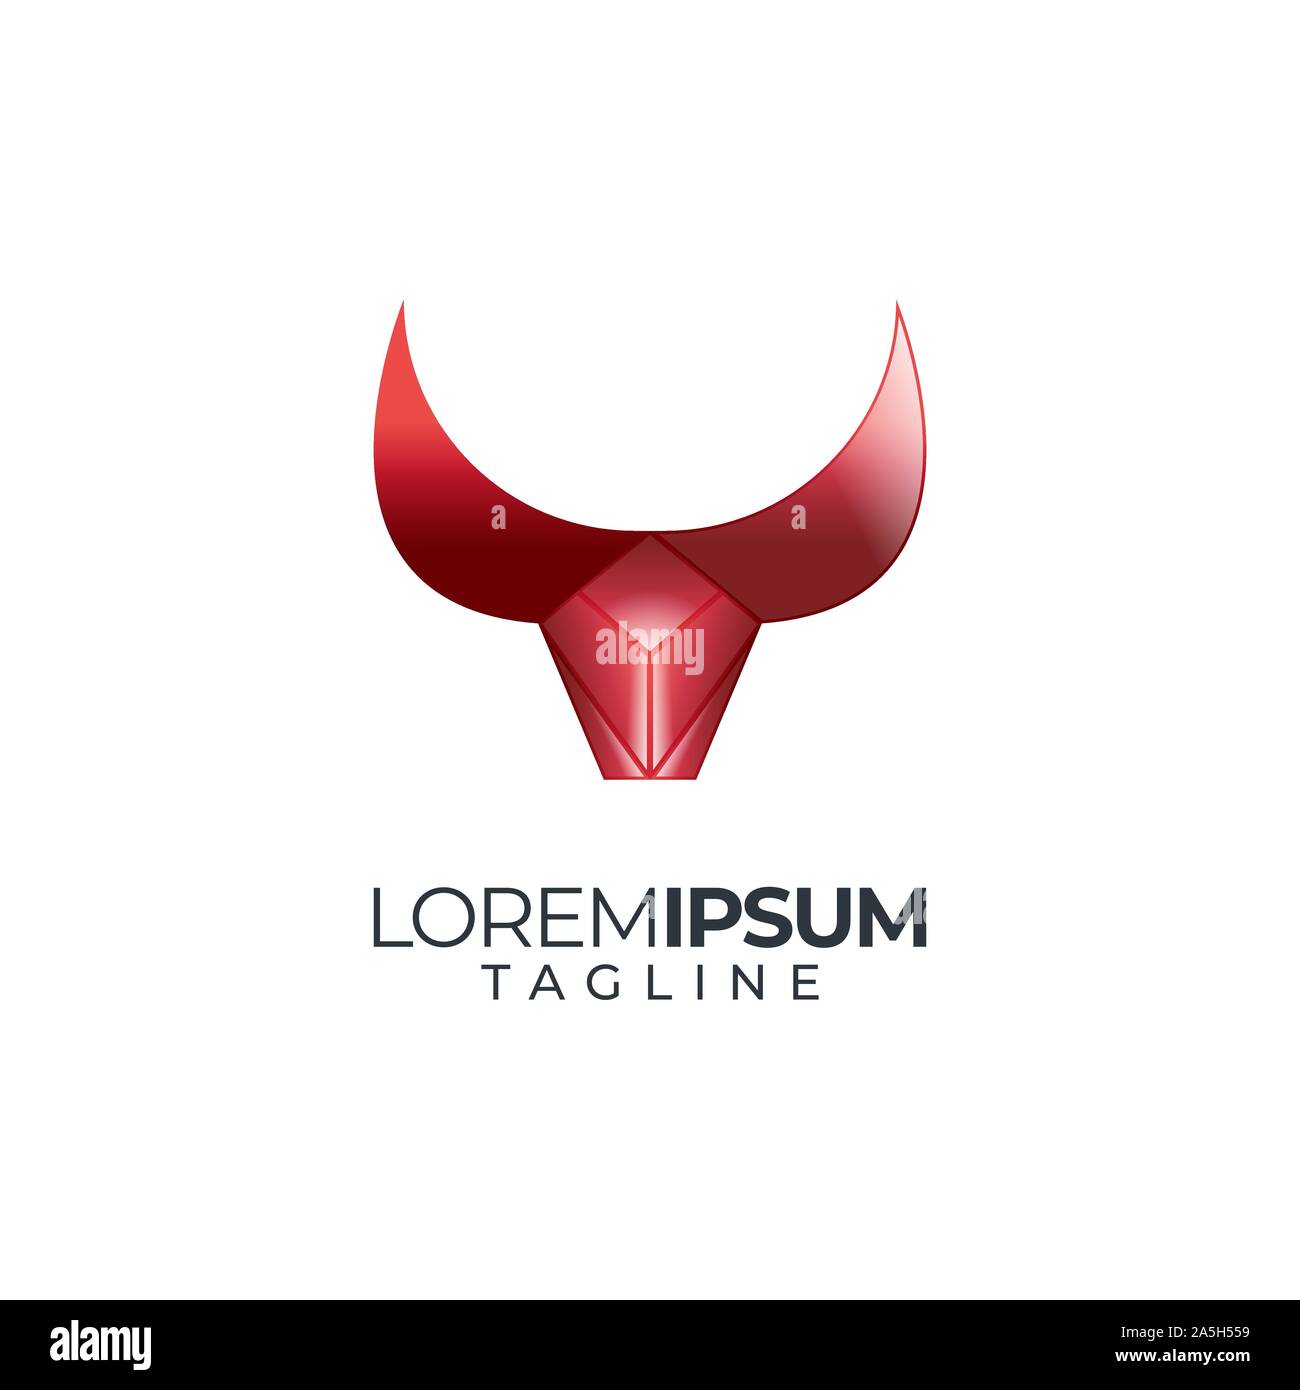 Taurus graphic design template vector isolated illustration Stock Vector